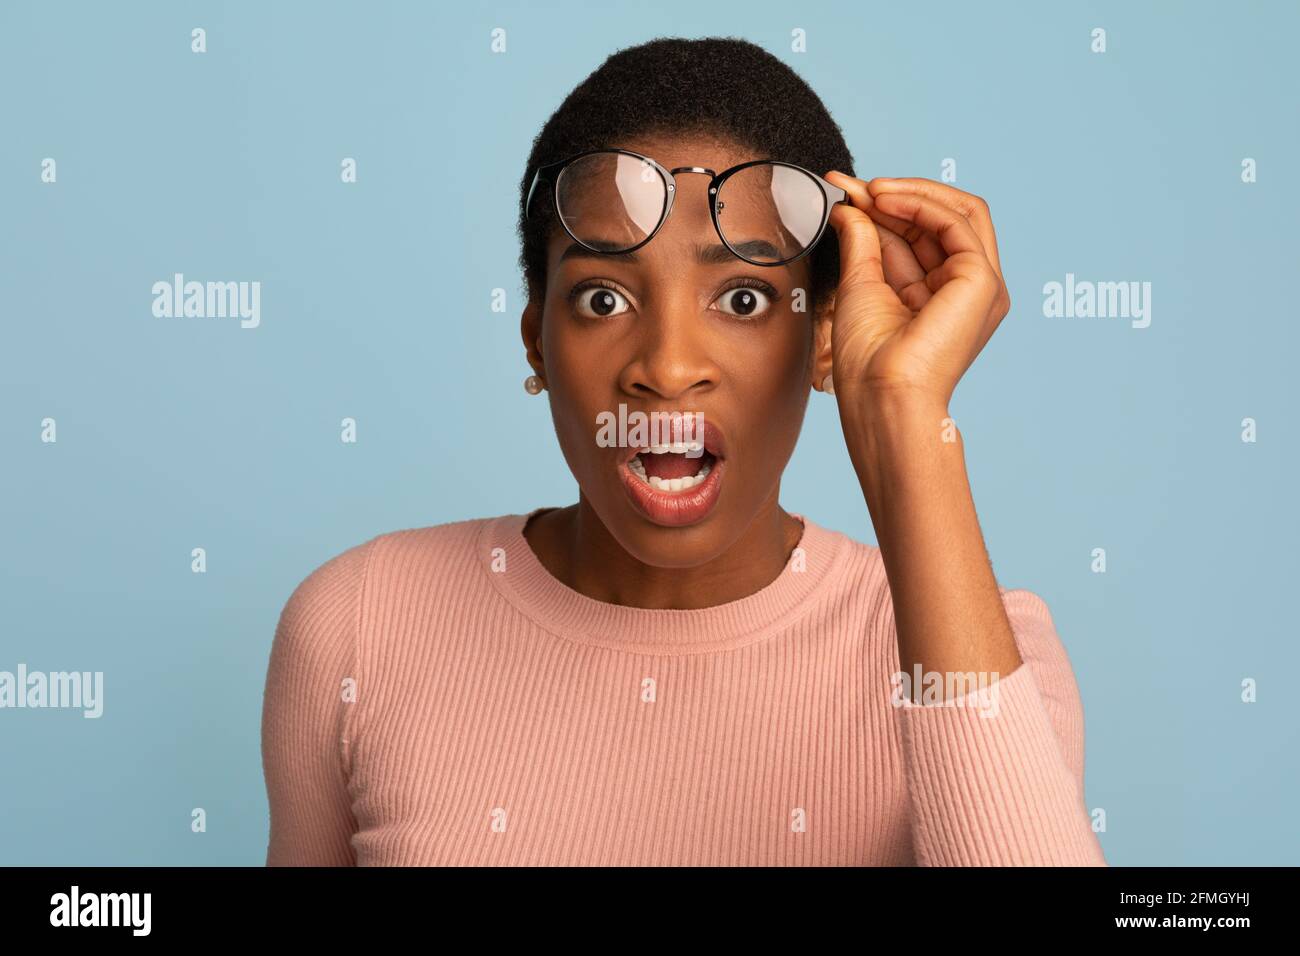 Confused Black Female Taking Off Glasses And Looking At Camera With Shock  Stock Photo - Alamy